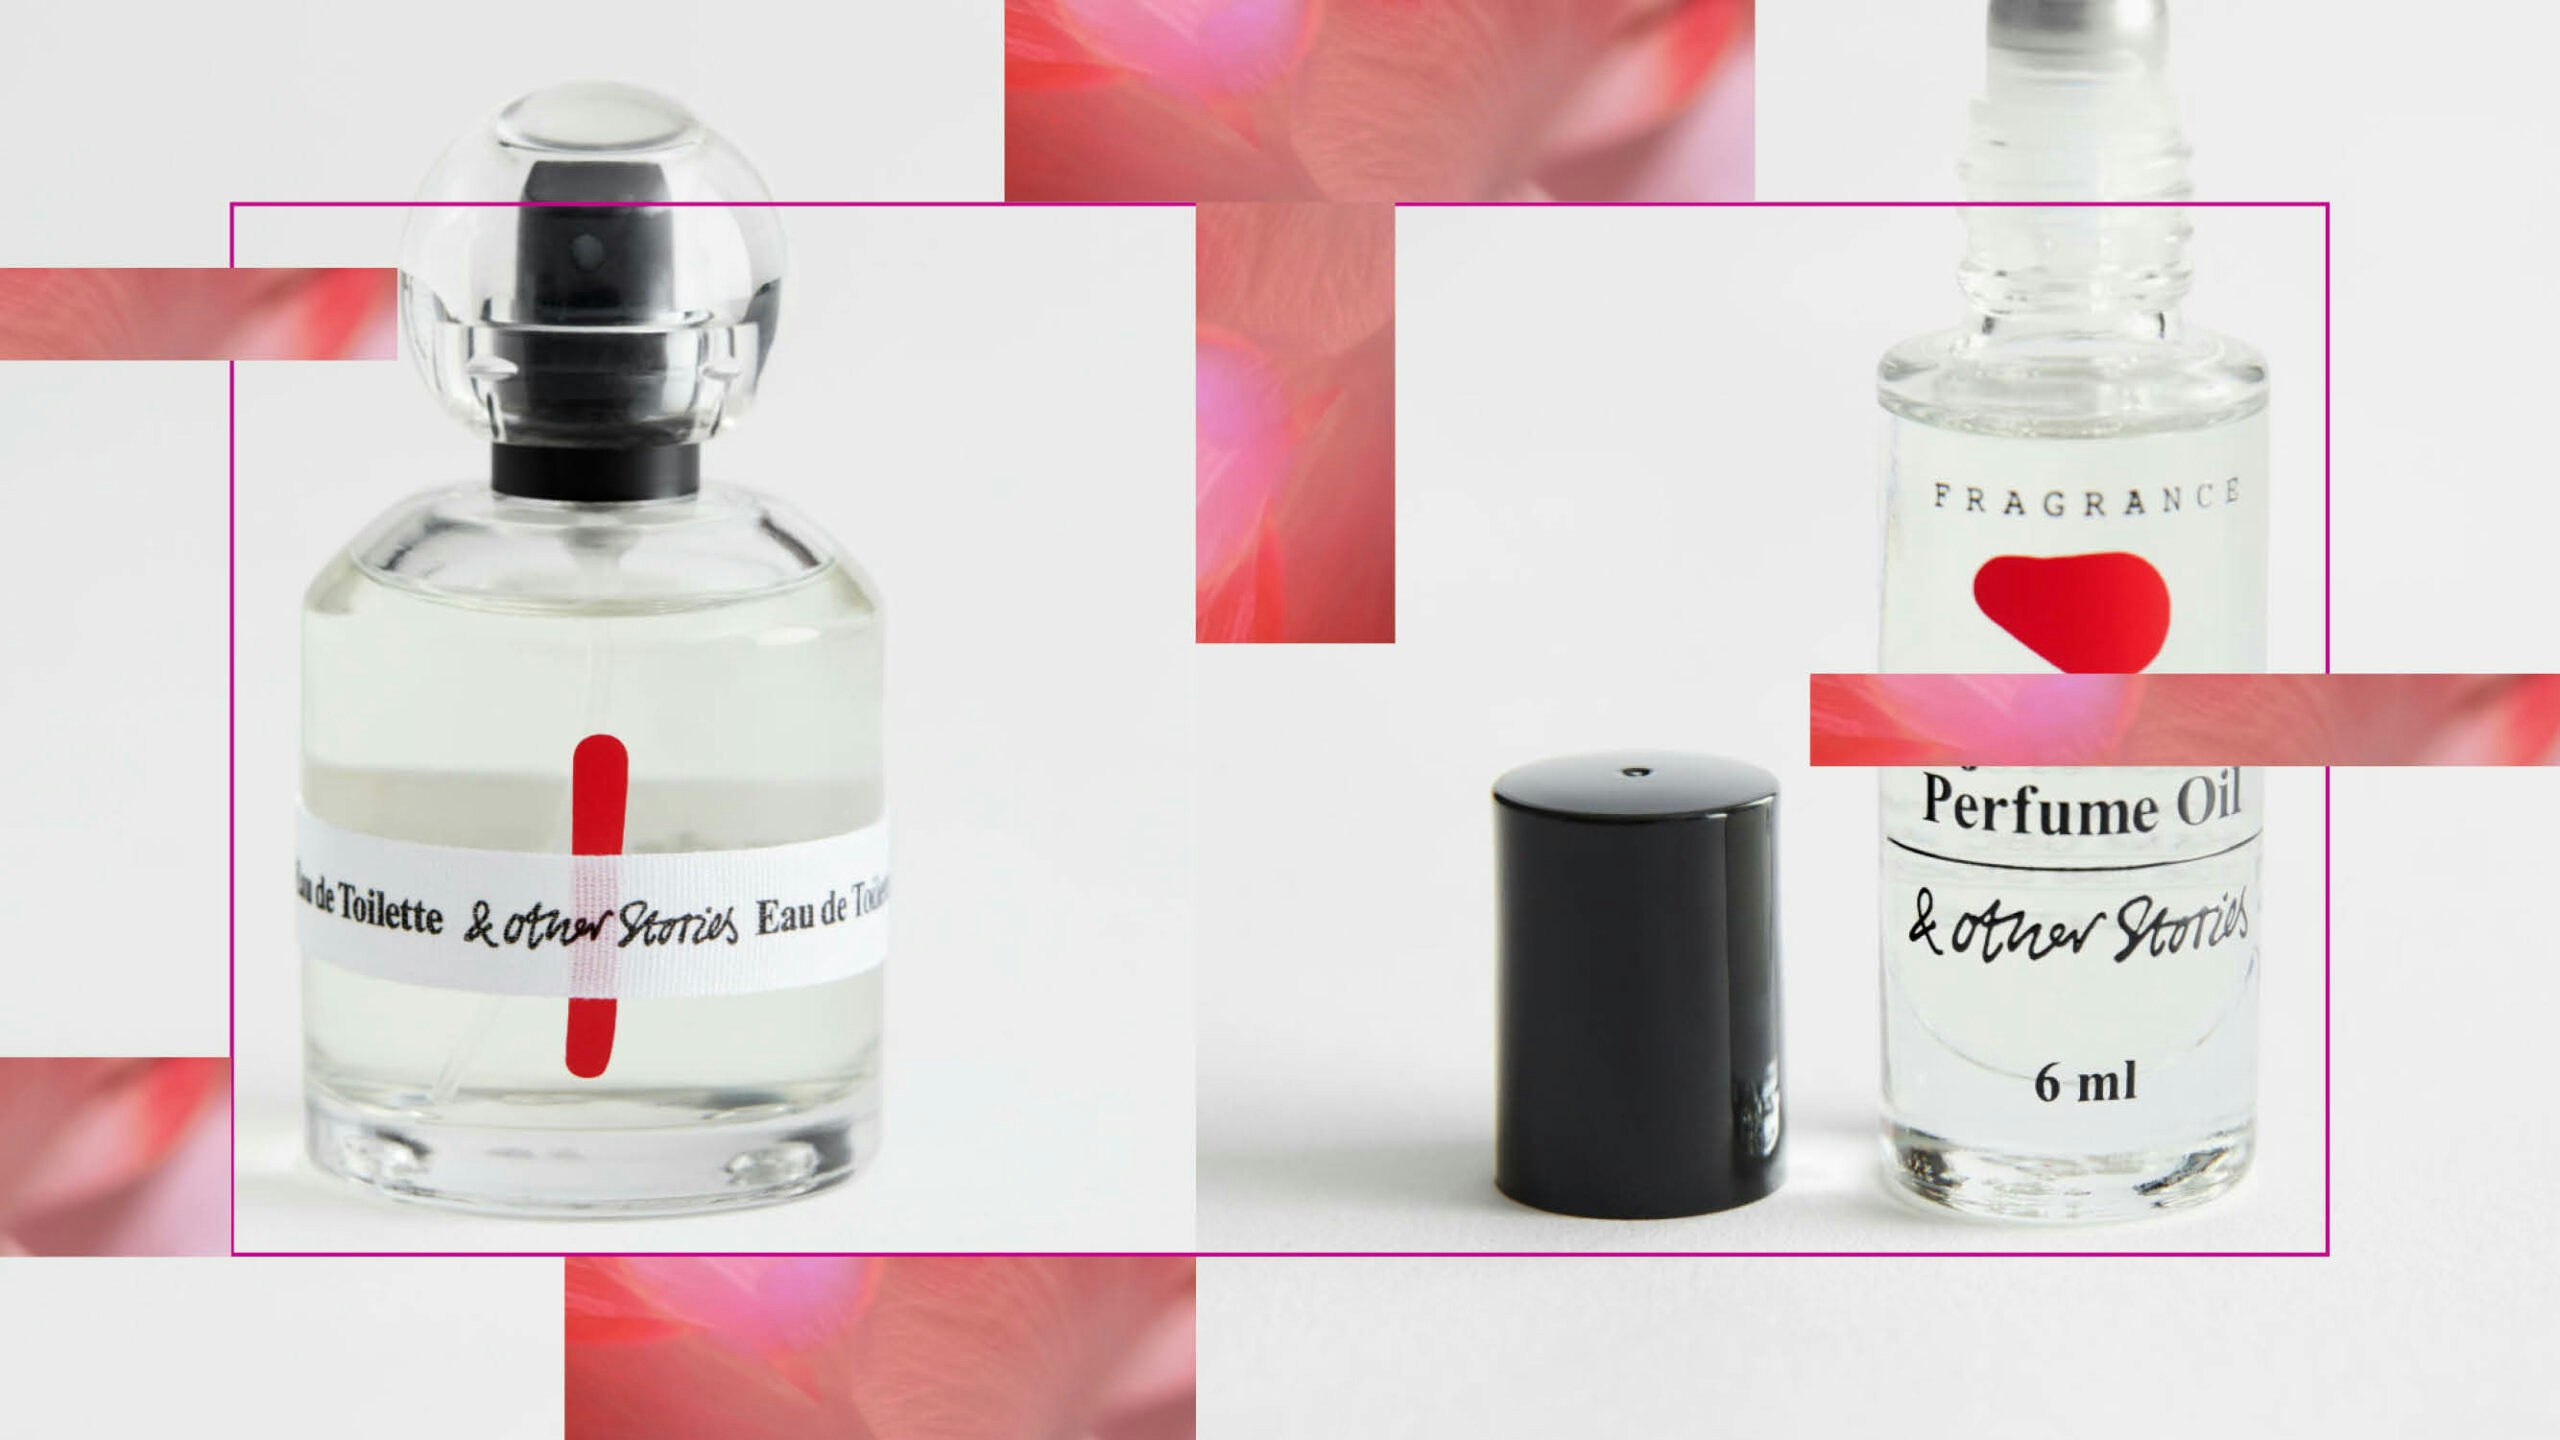 13 Best Baccarat Rouge 540 Dupes That Smell Like The Viral Perfume